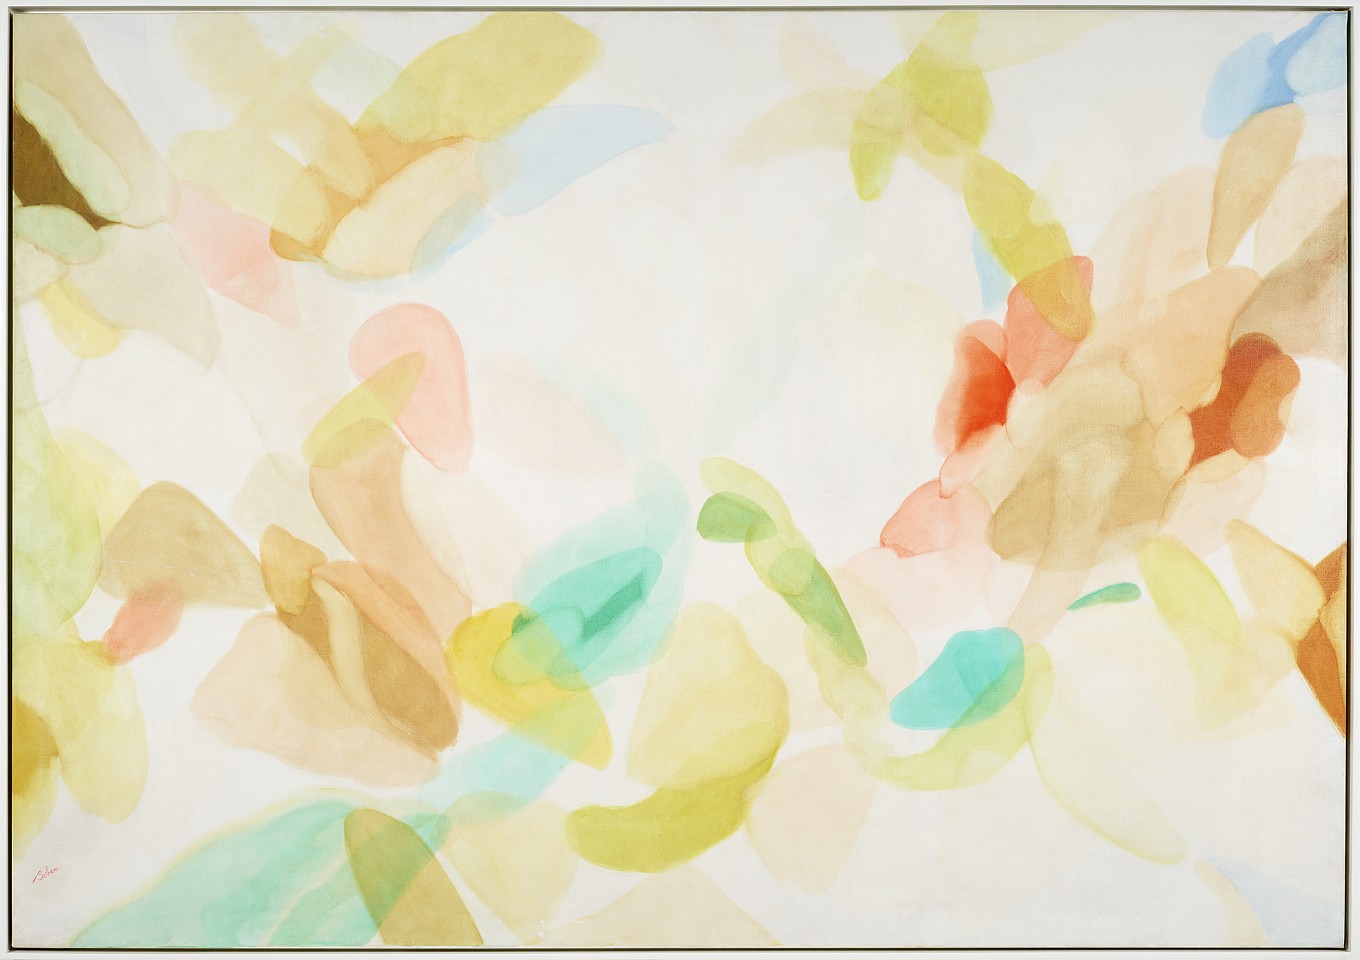 Alice Baber, The Sound of the Summer Hermit, 1976
Oil on canvas, 72 x 102 3/4 in. (182.9 x 261 cm)
BAB-00034